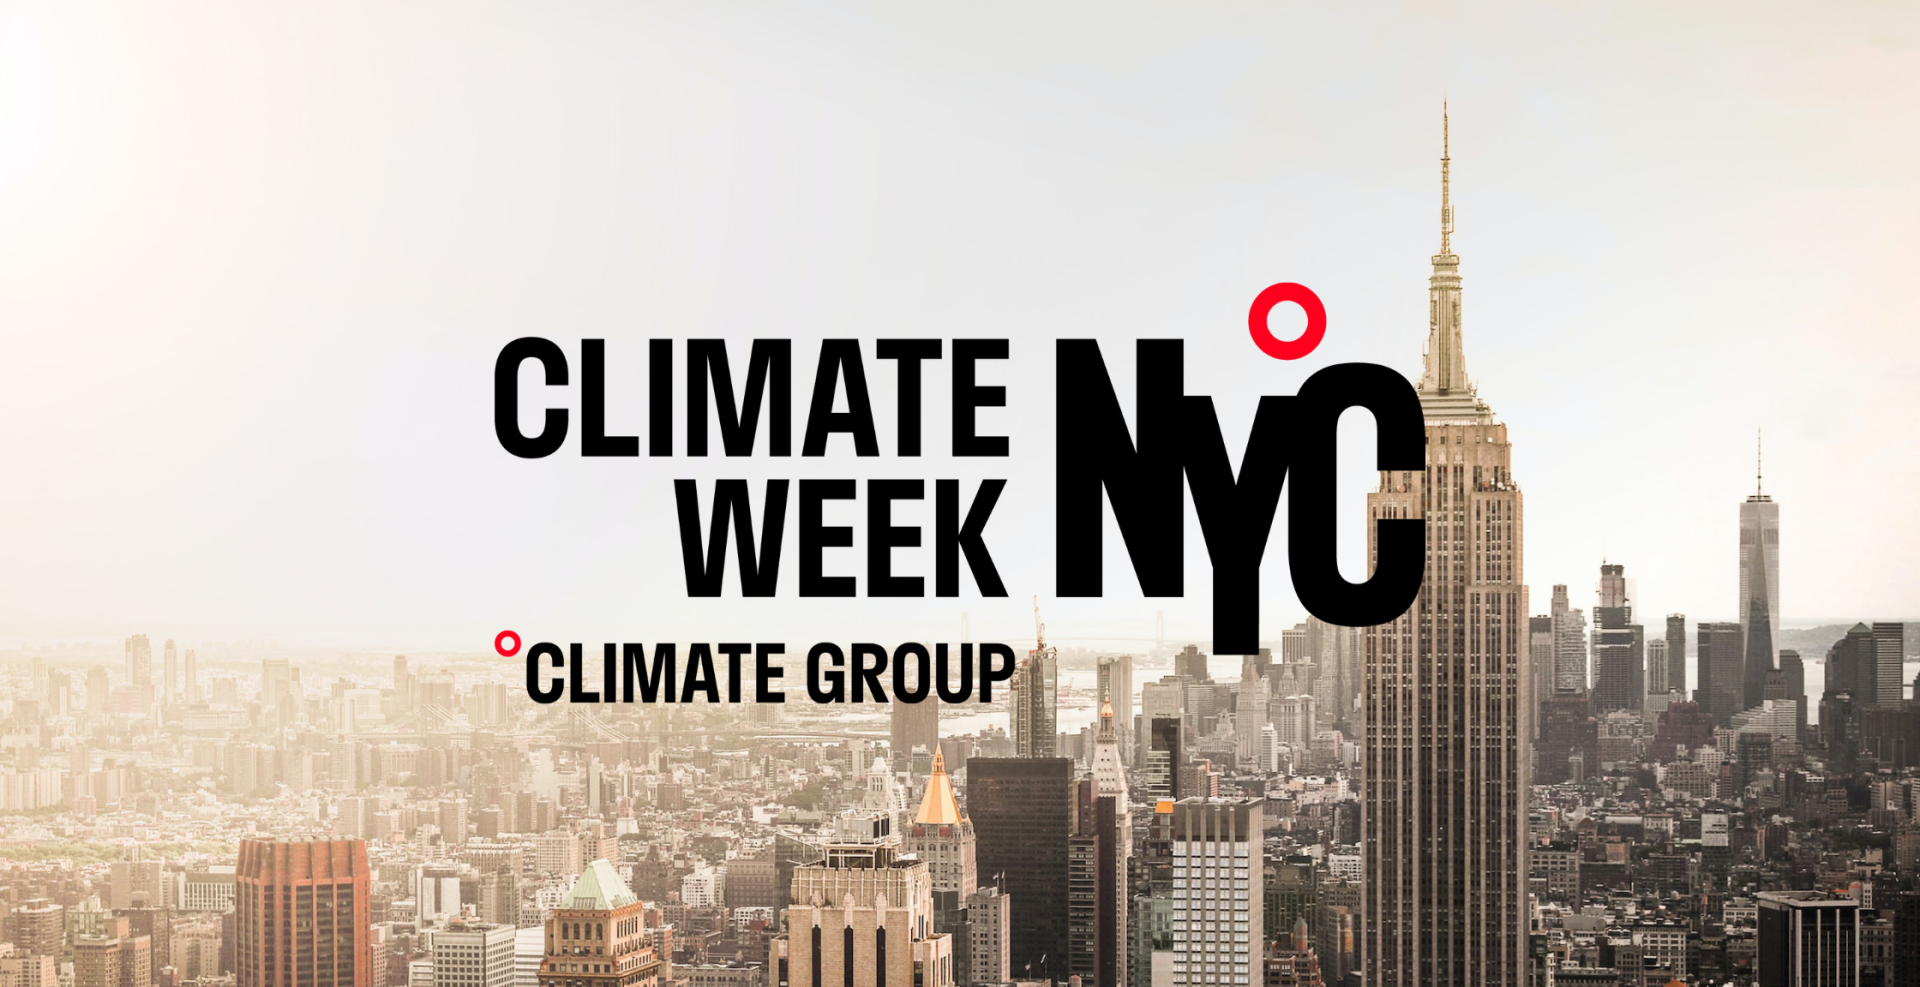 An aerial view of the New York City skyline with the Climate Week NYC logo overlaid